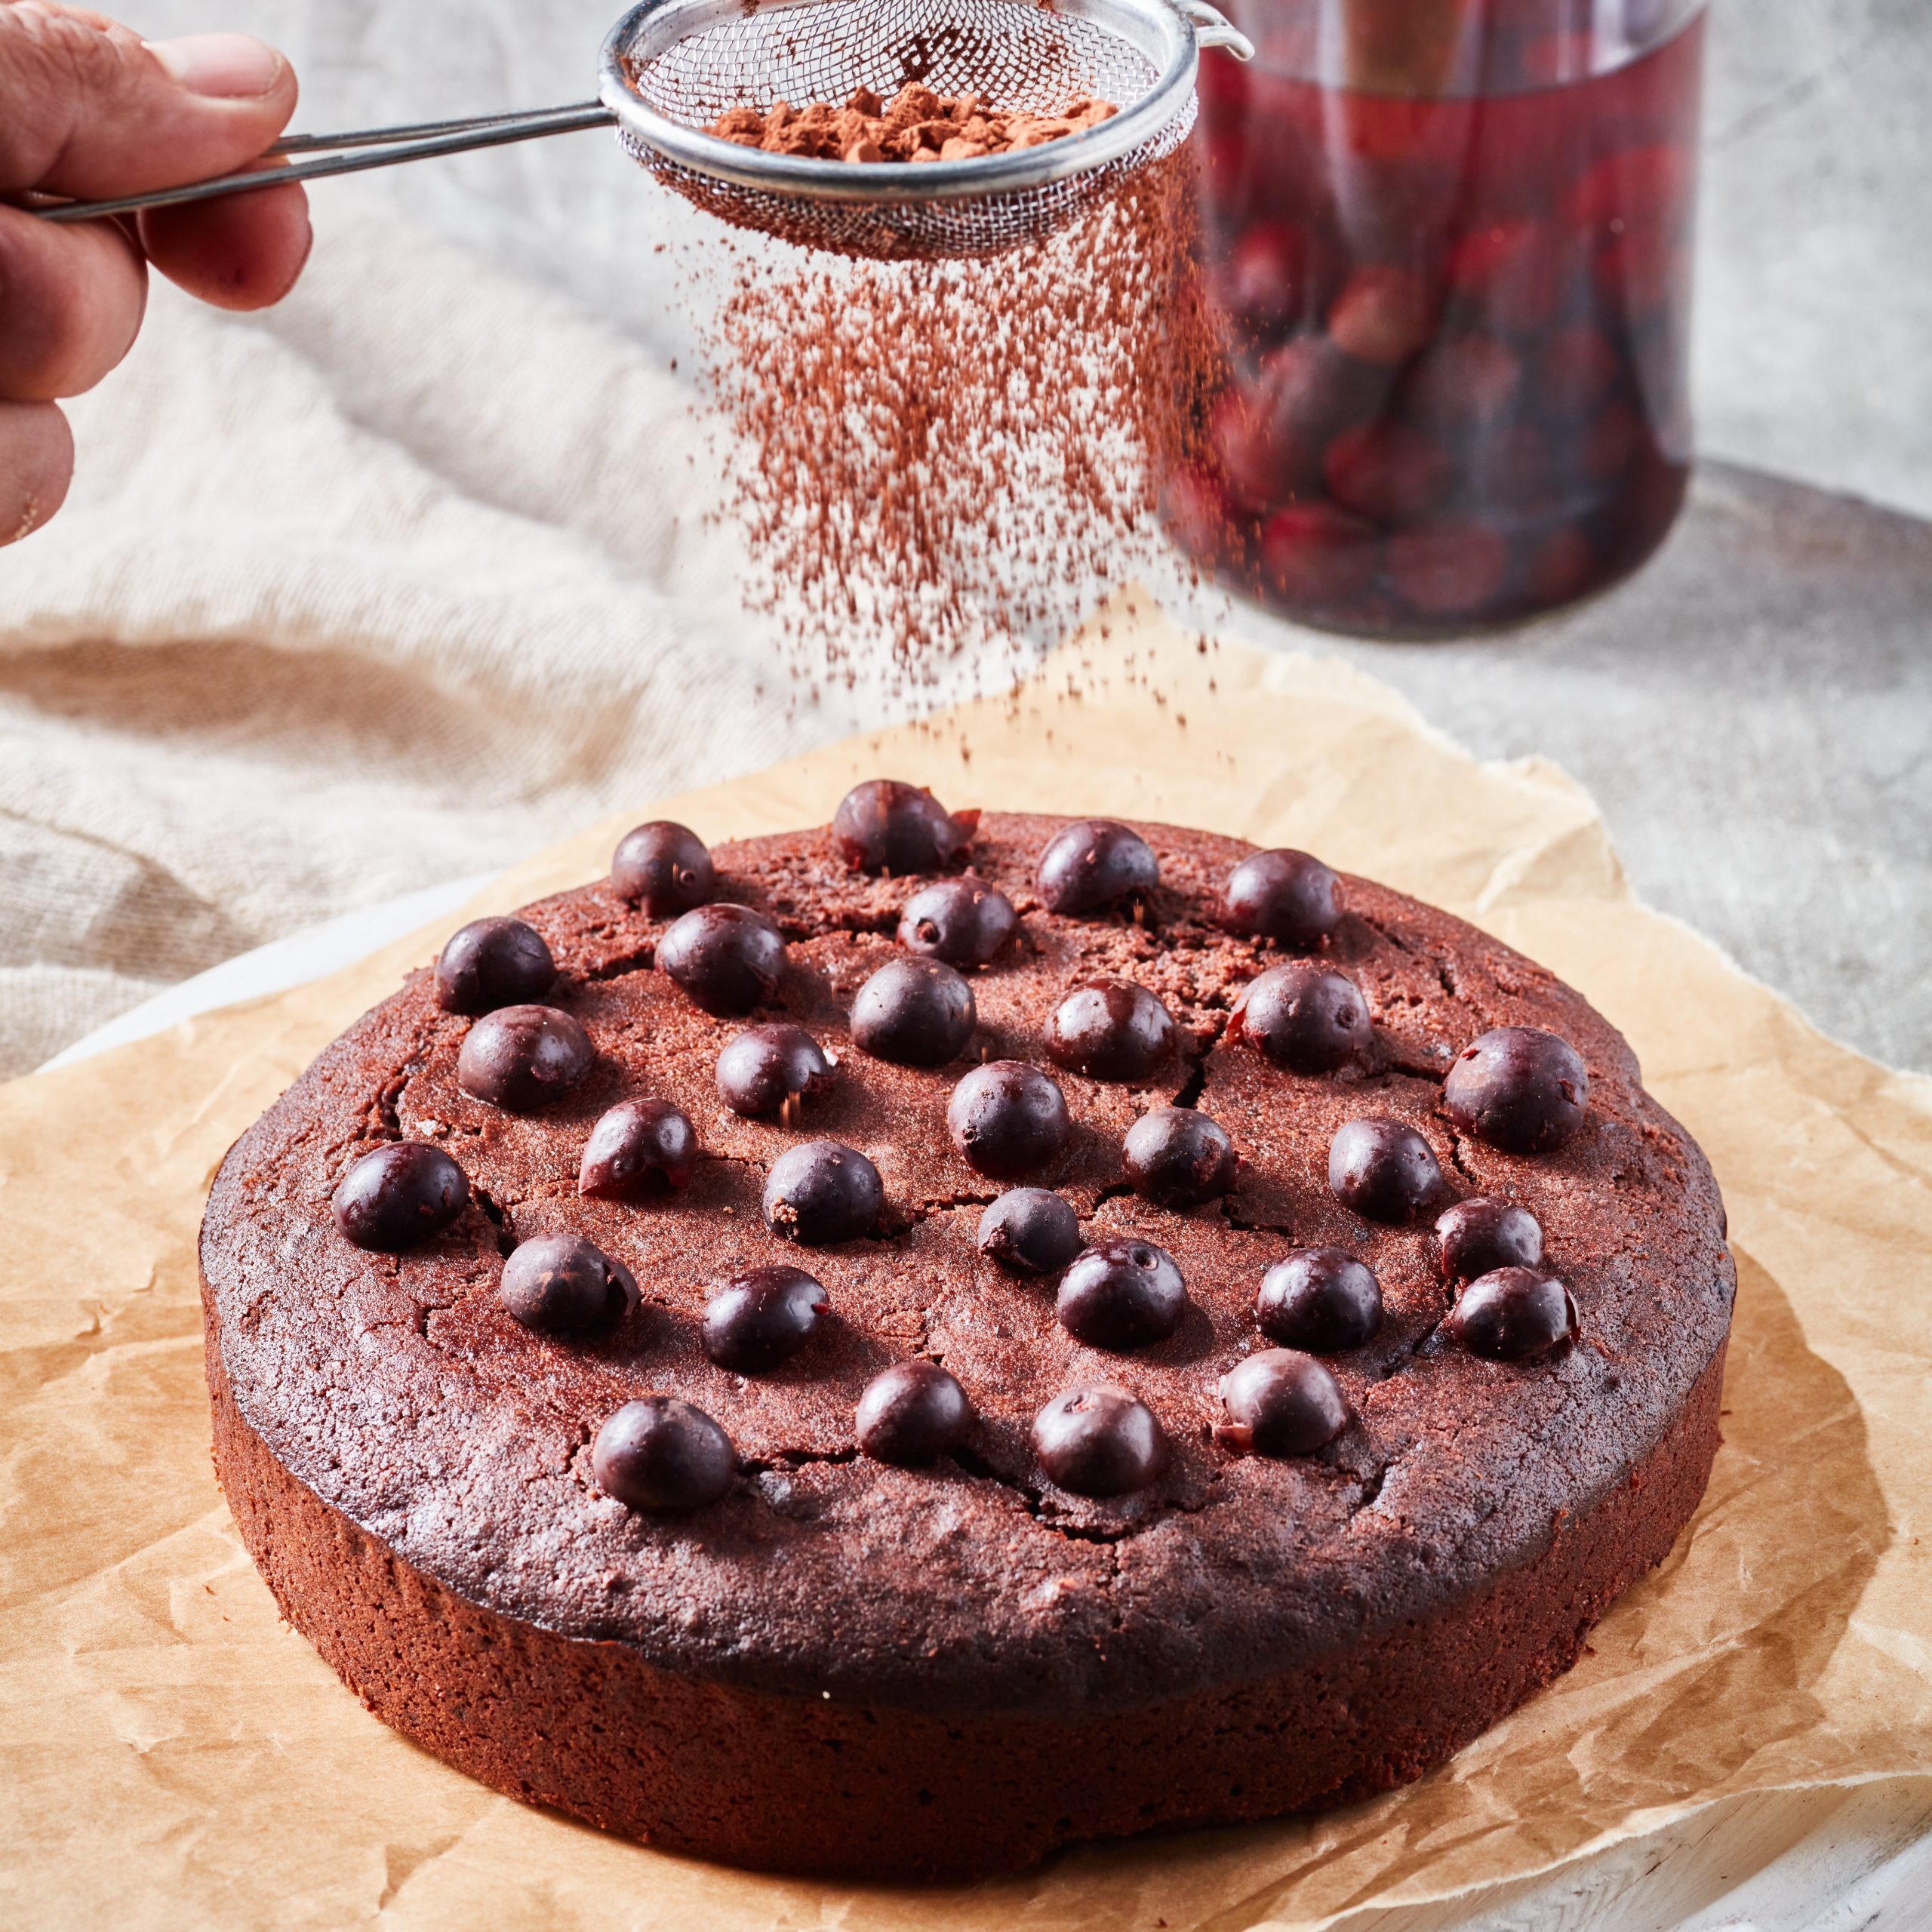 Chocolate cake decorated with gin soaked sloes